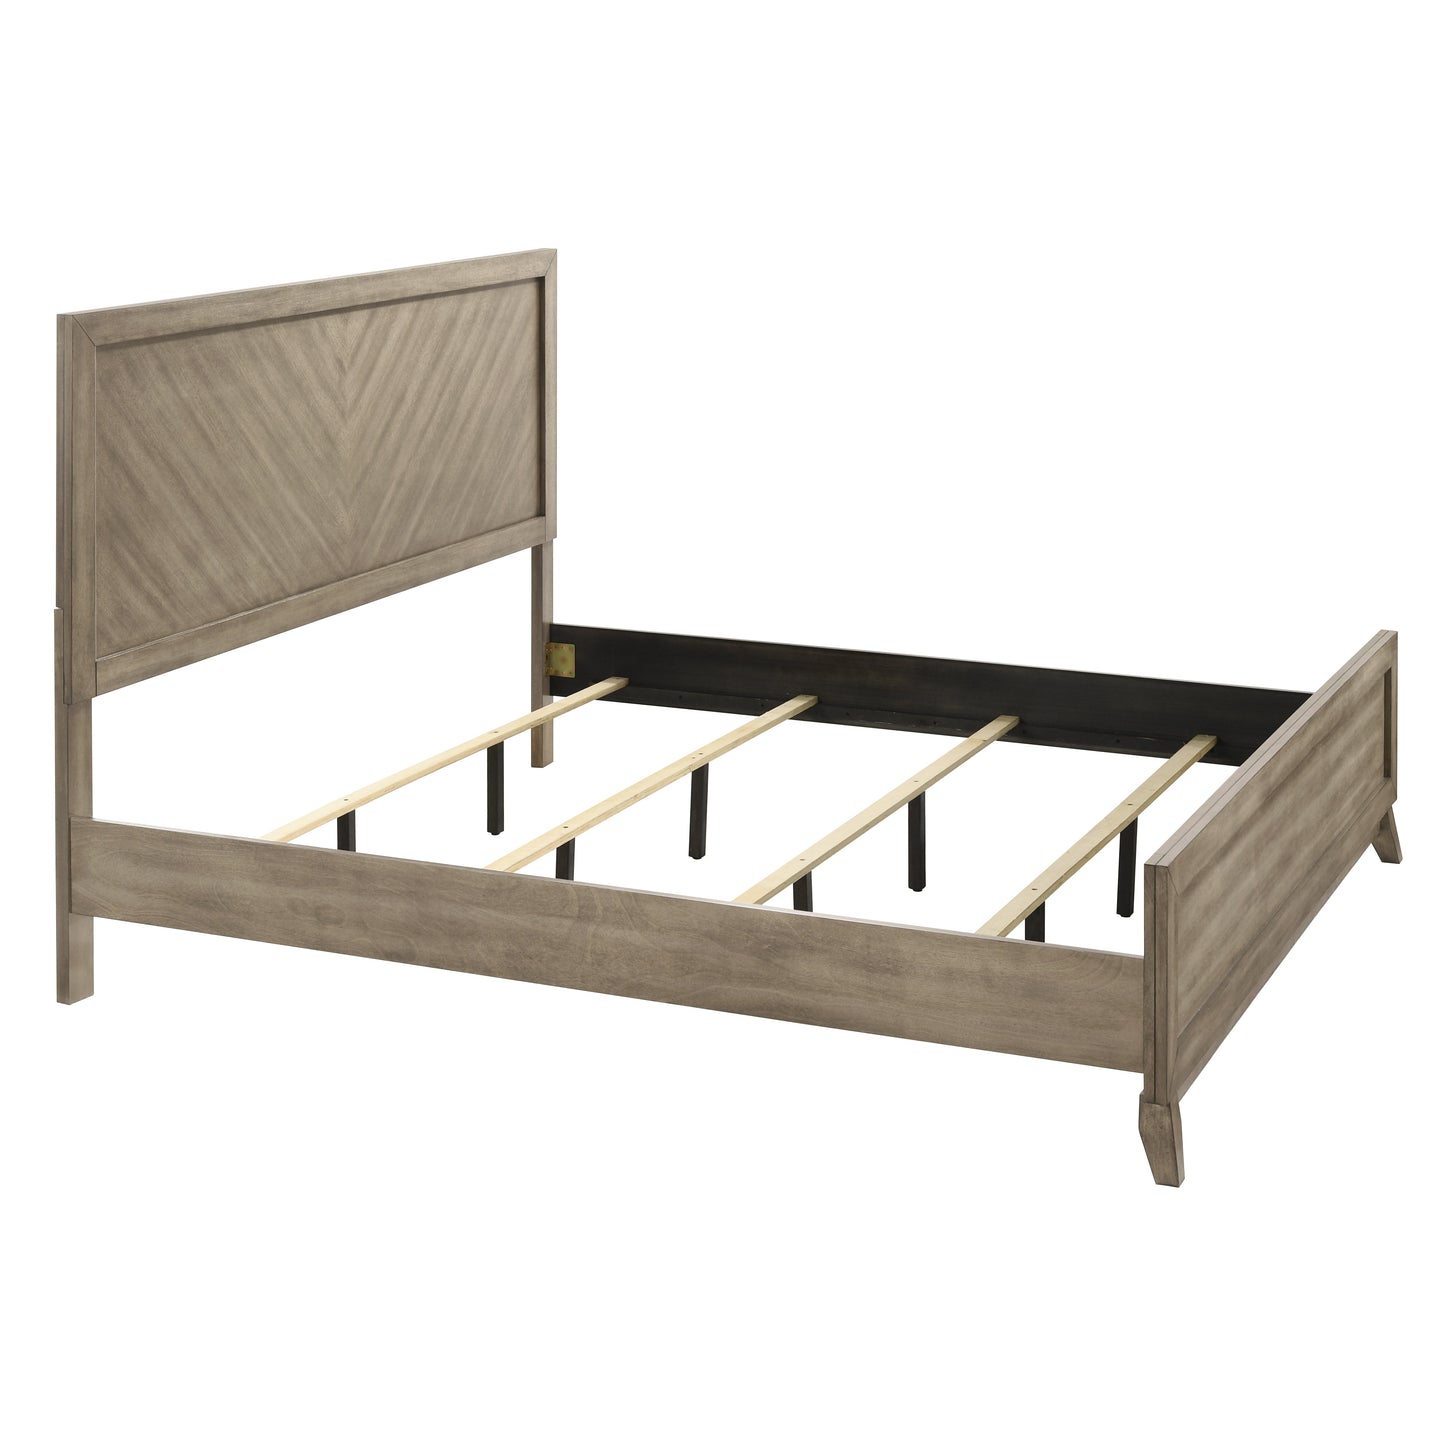 Roundhill Furniture Arena Contemporary Wood Panel Bed in Antique Gray